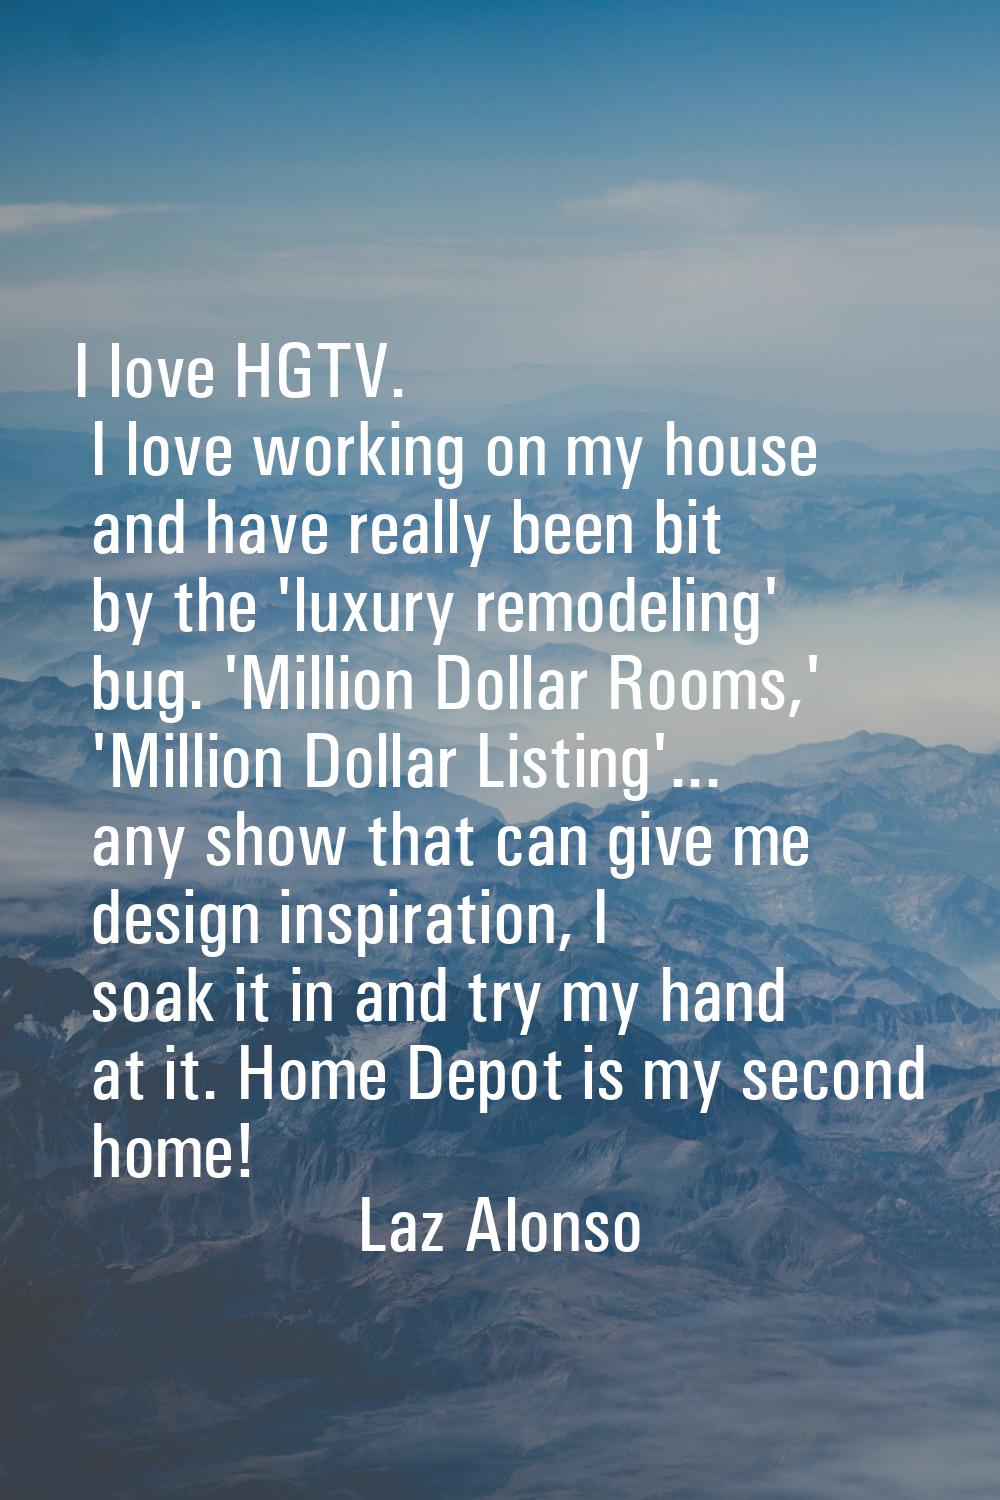 I love HGTV. I love working on my house and have really been bit by the 'luxury remodeling' bug. 'M